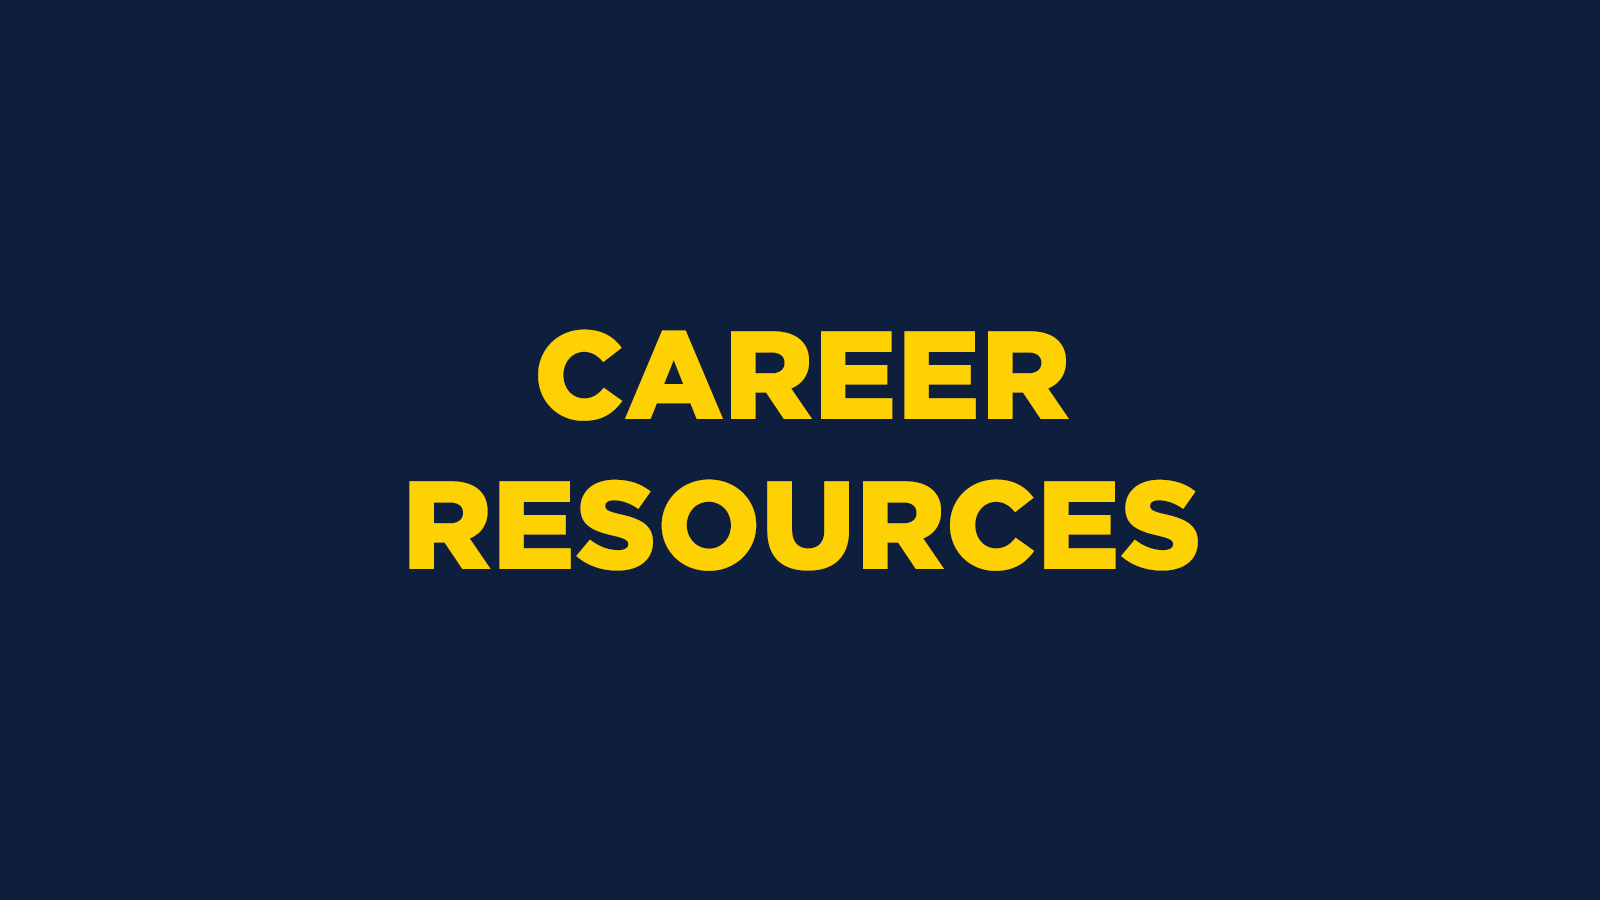 Career Resources